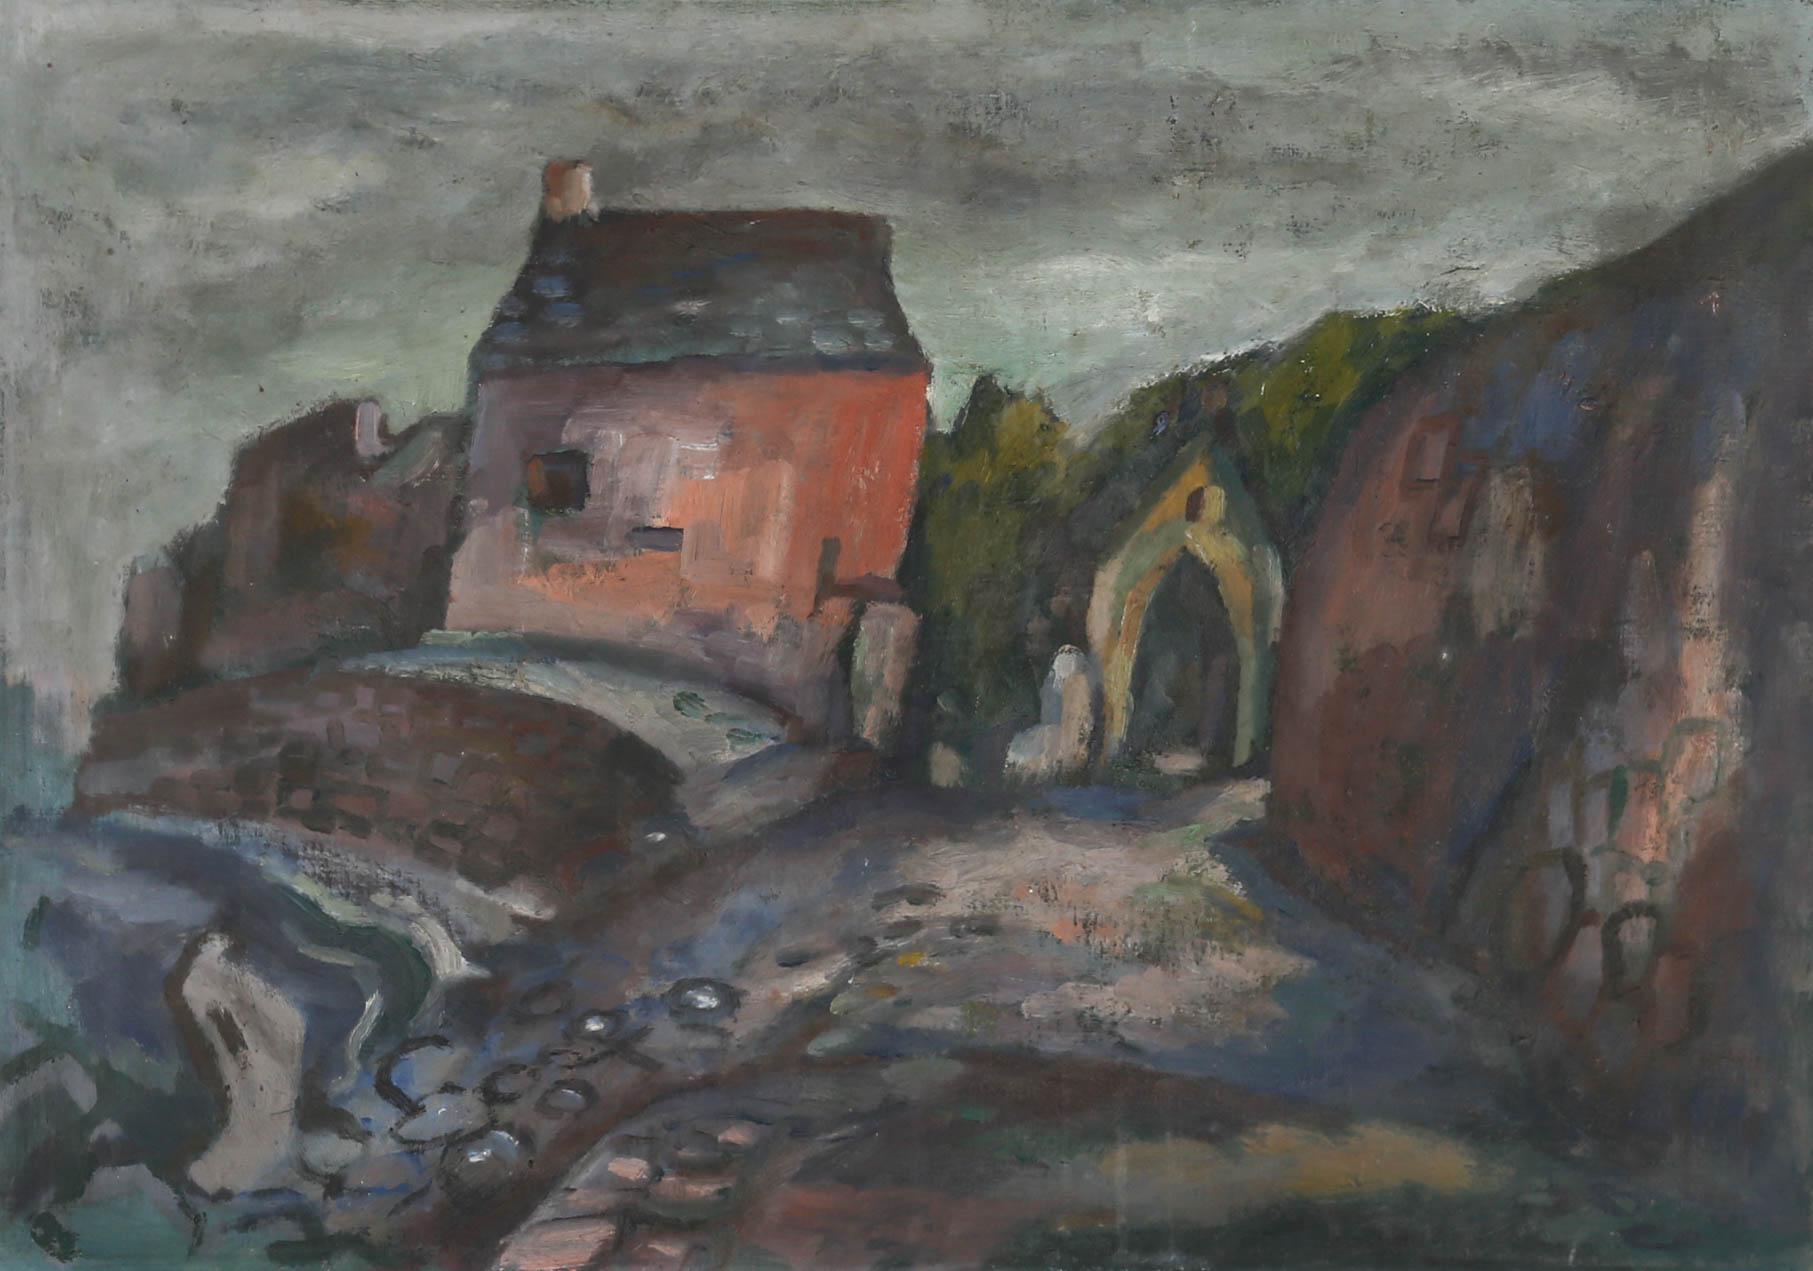 Framed Mid 20th Century Oil - House in a Landscape - Painting by Unknown